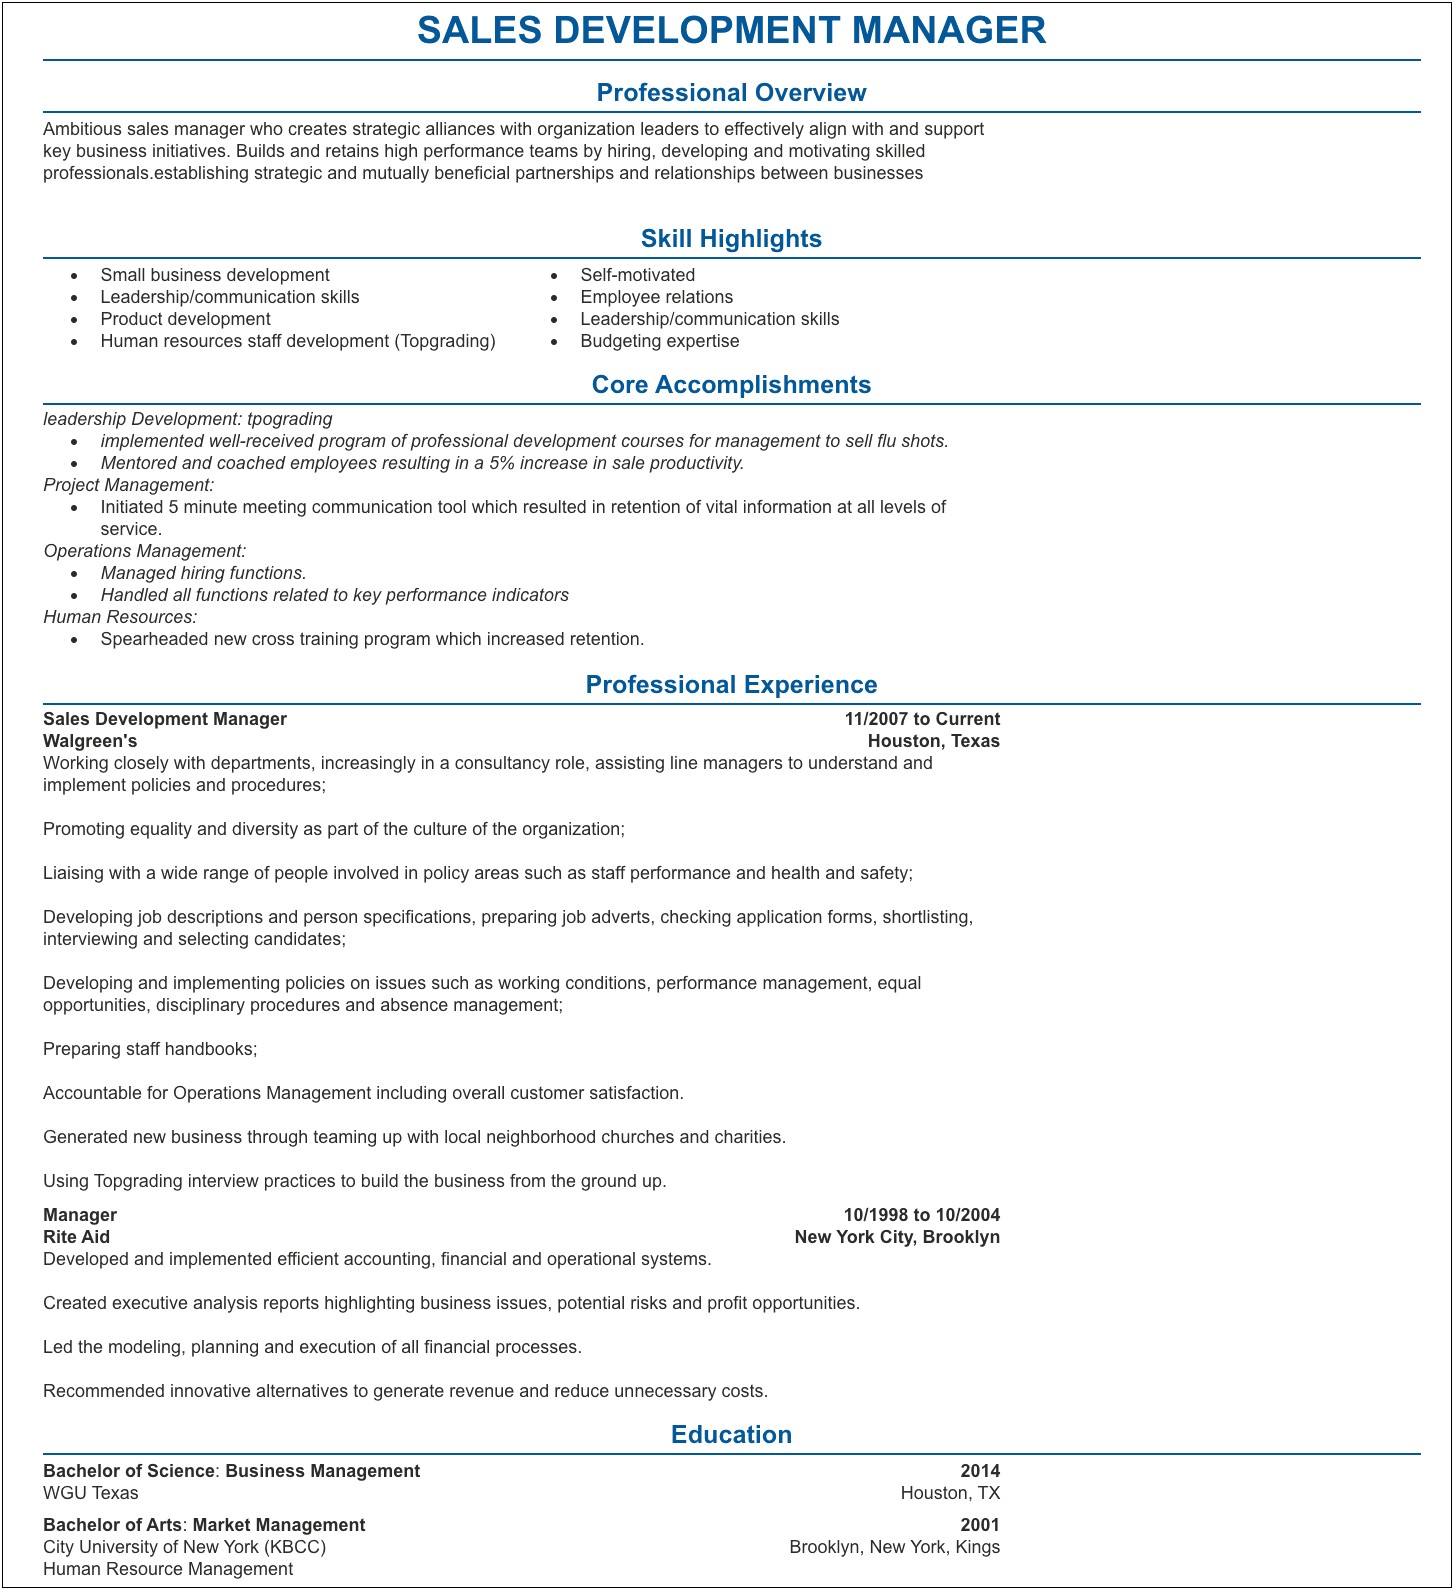 Example Of Resume Human Service And Business Owner